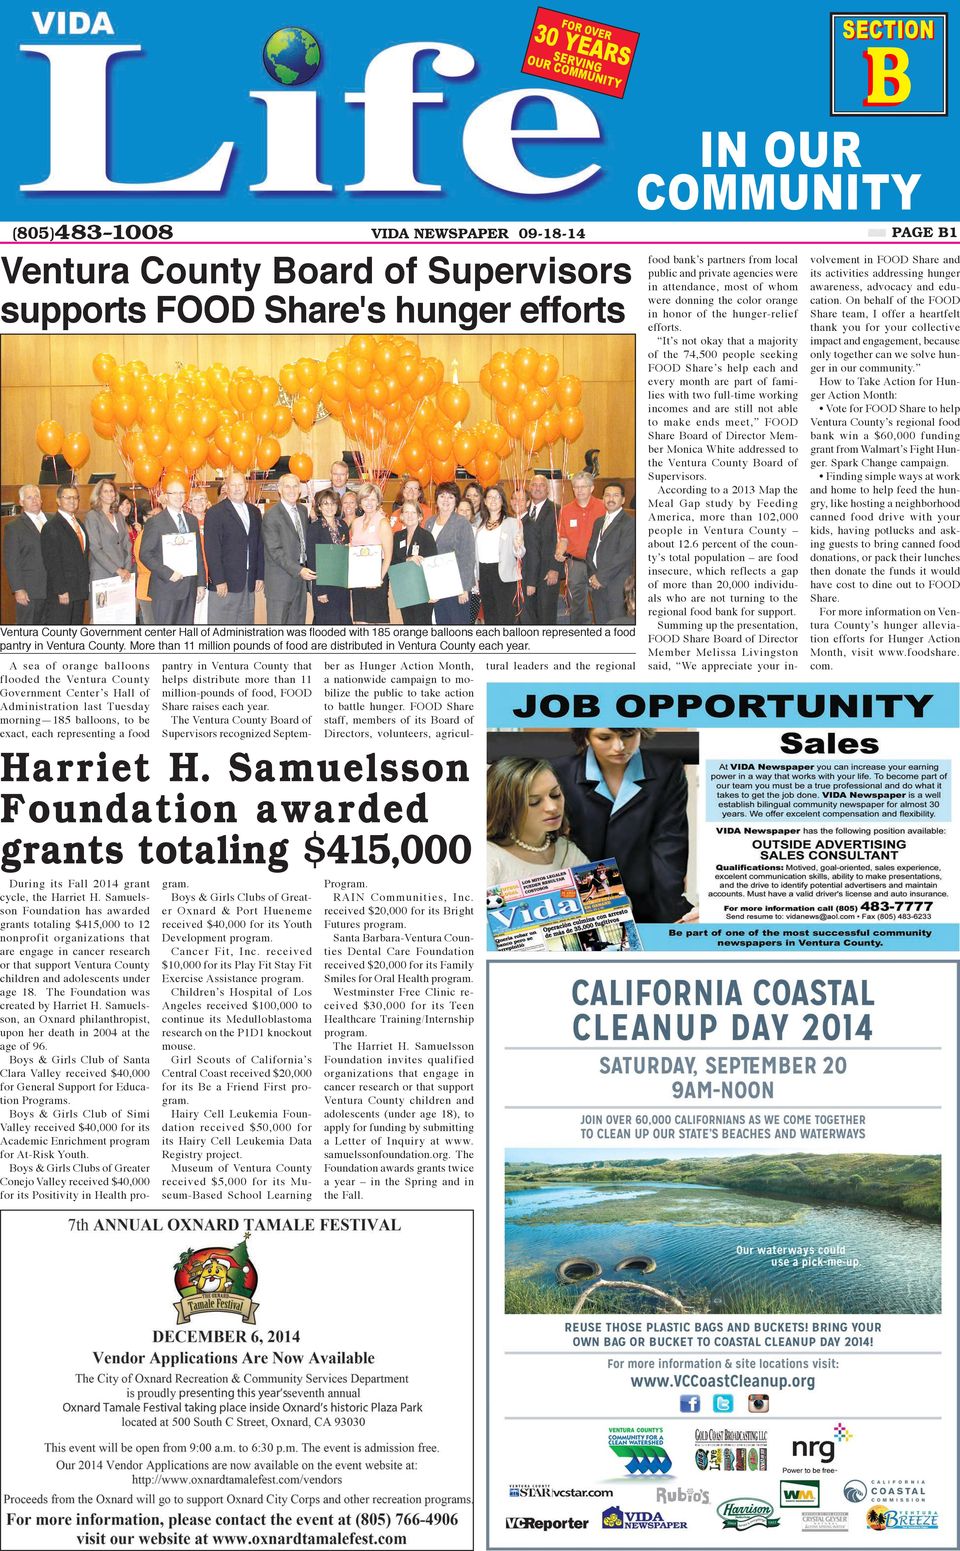 More than 11 million pounds of food are distributed in Ventura County each year.